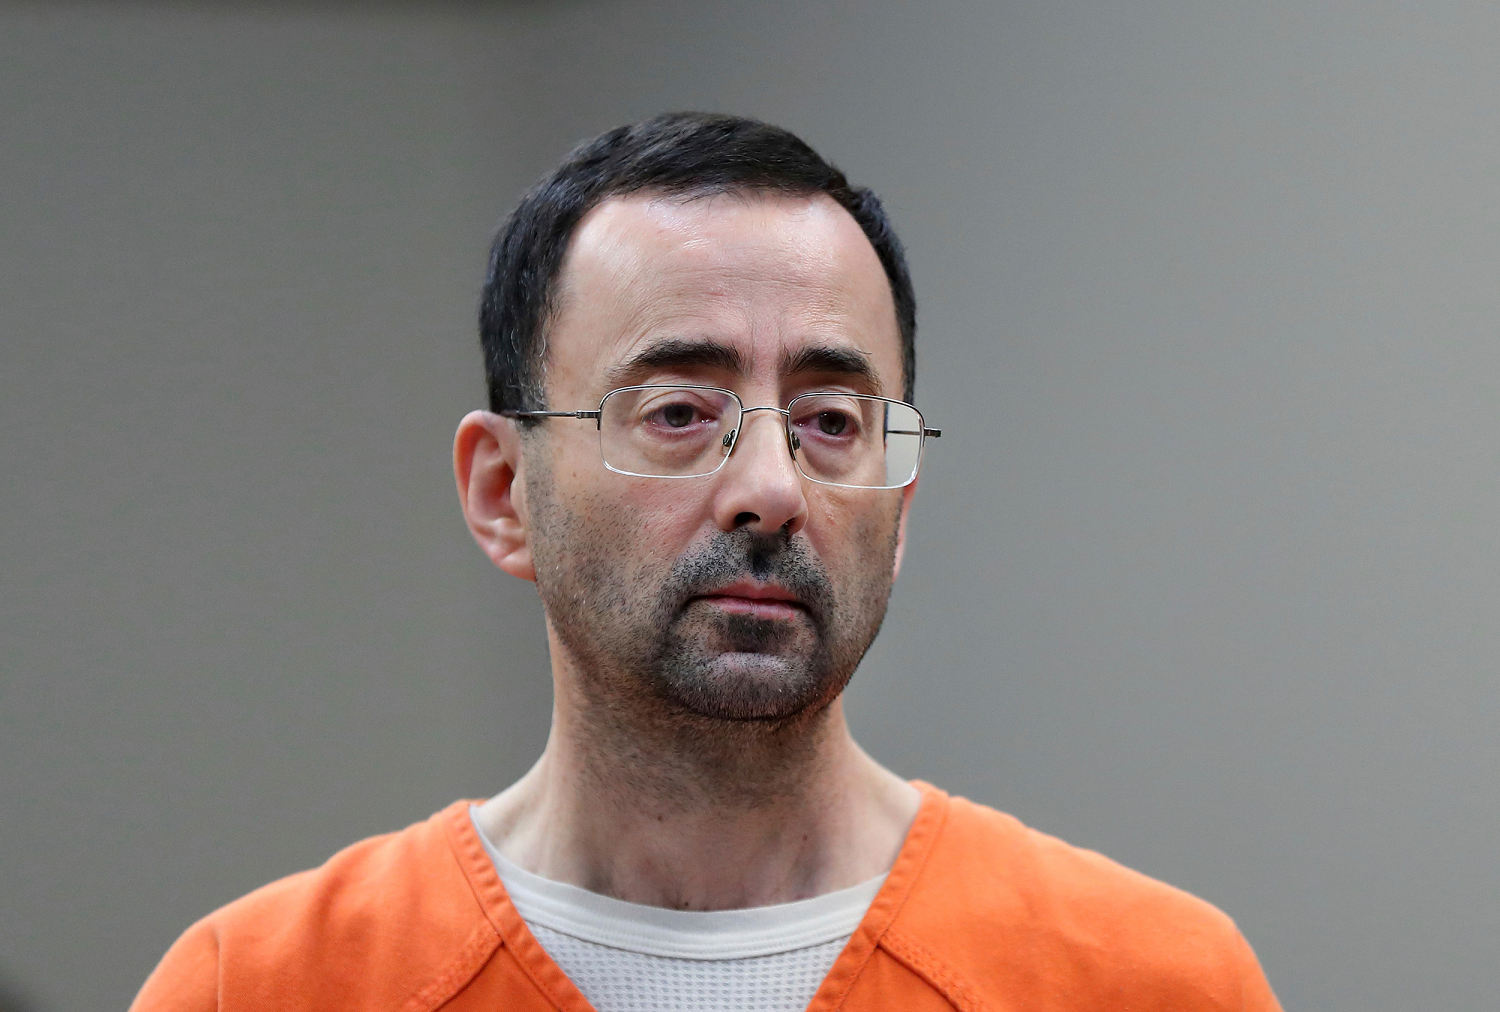 Justice Department in settlement talks to pay around $100 million to Larry Nassar victims, sources say